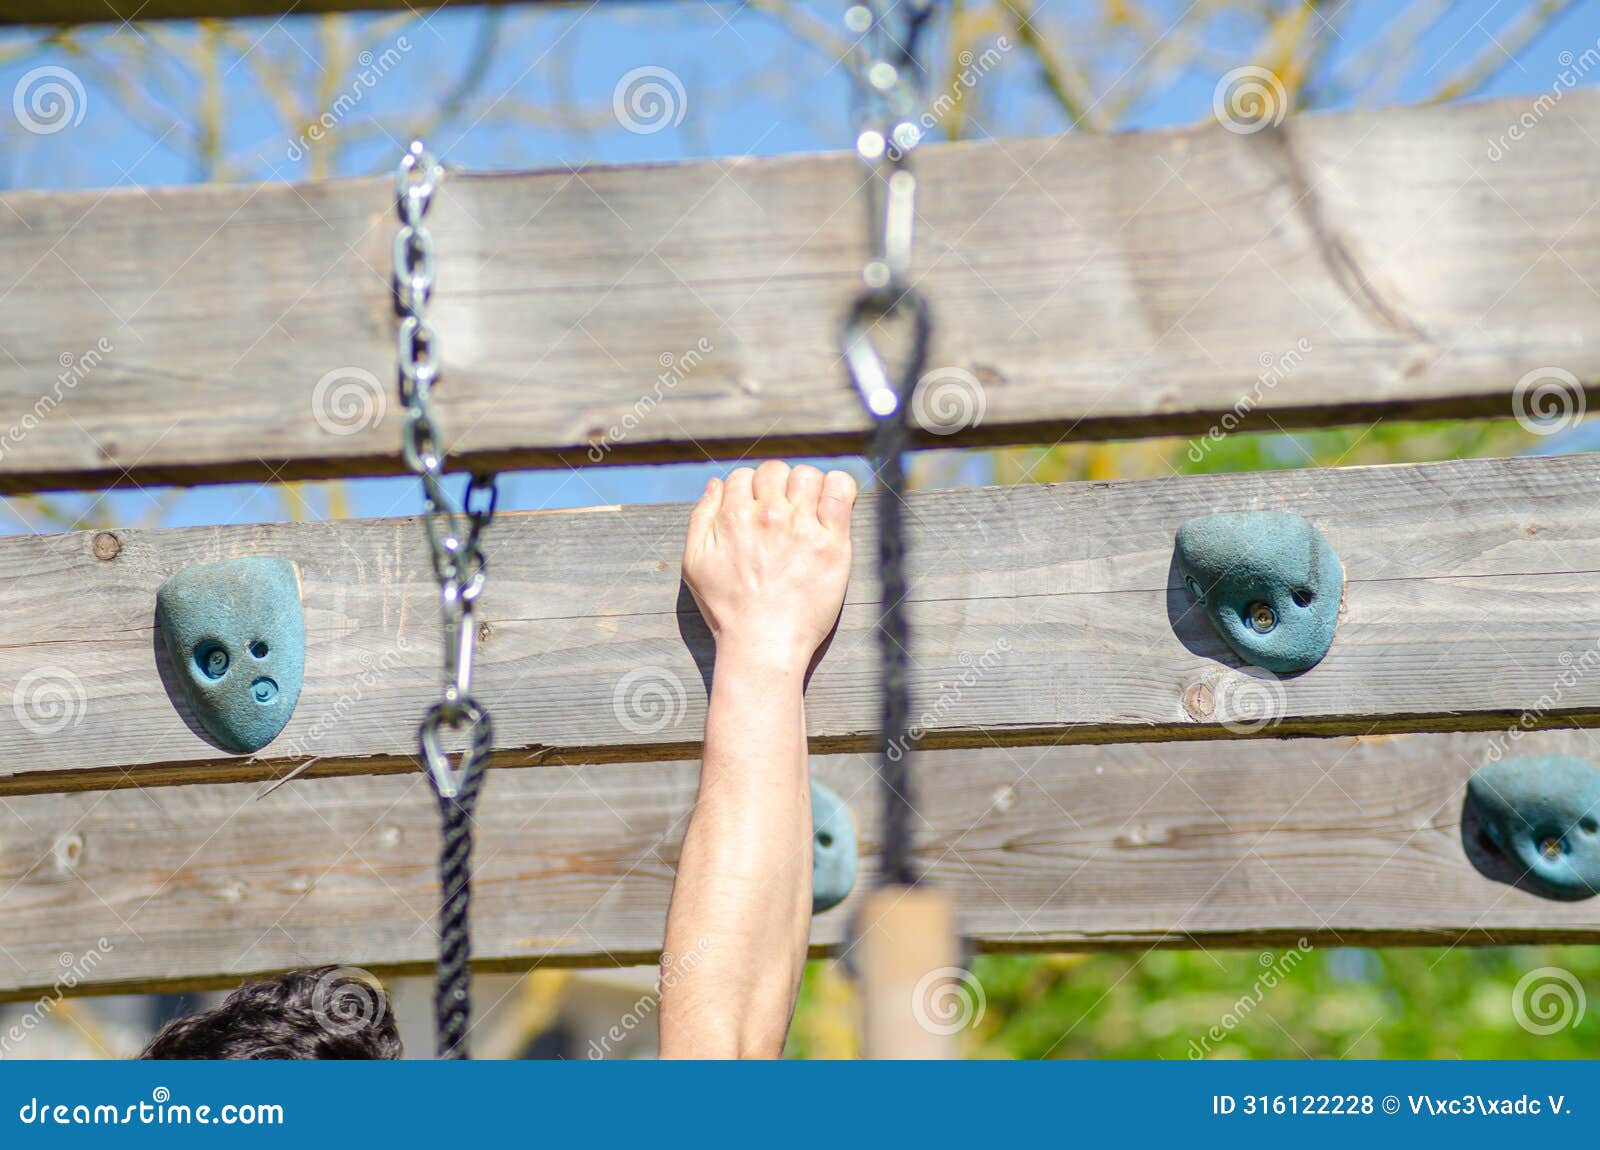 athlete hand at a hanging obstacle at an obstacle course race, ocr